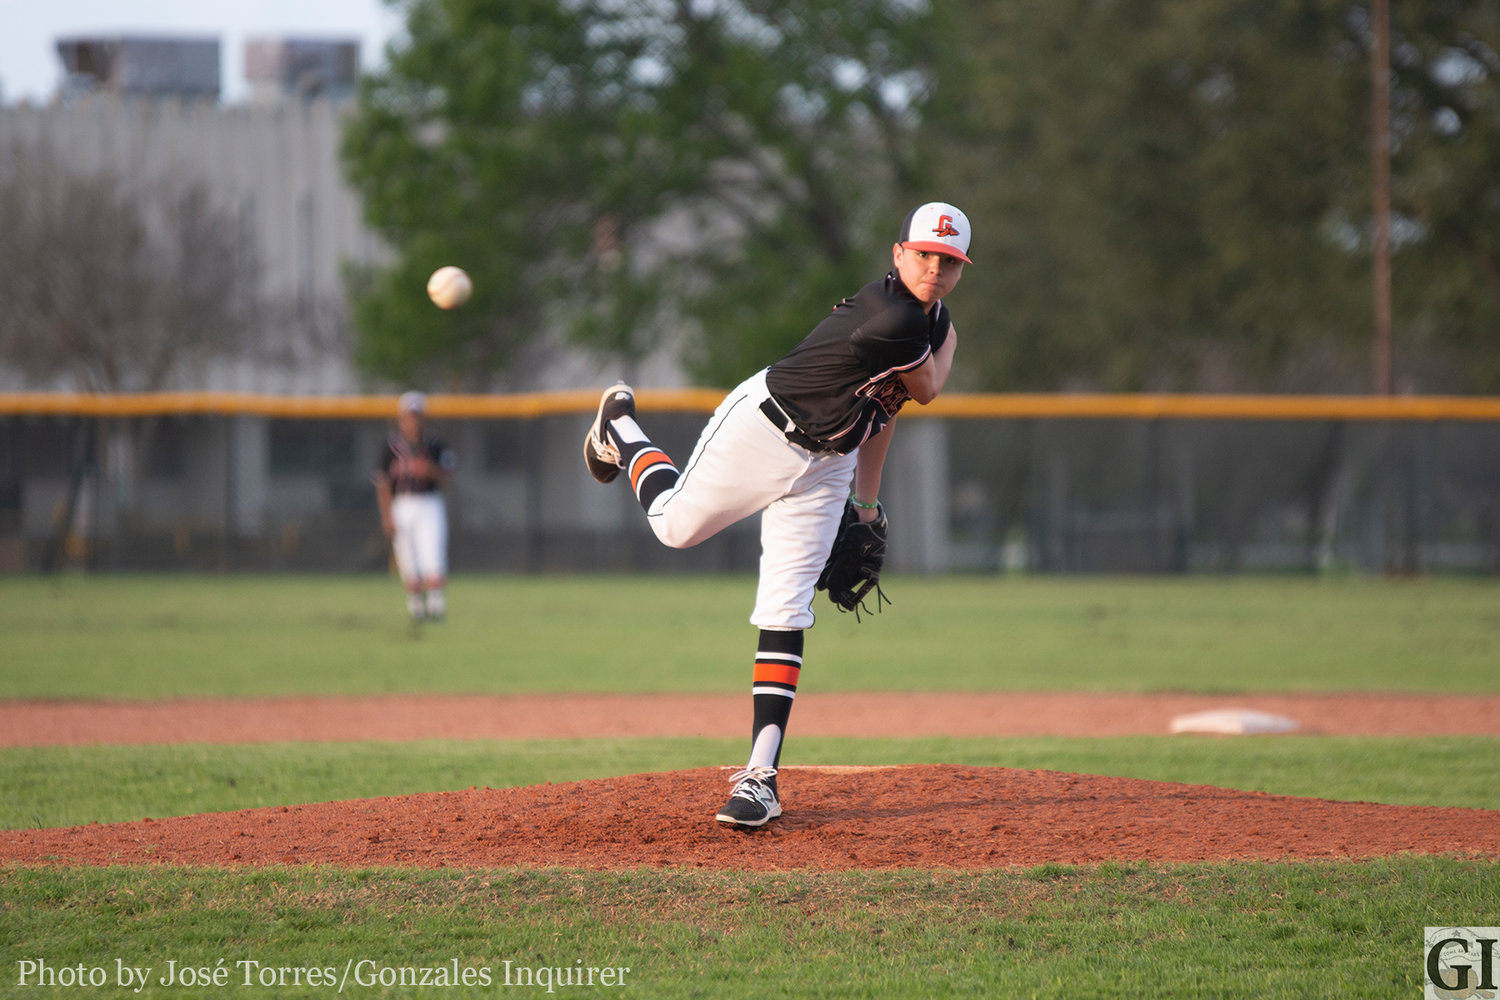 The Gonzales Apaches are young throughout the roster, with freshman pitcher Carson Gayton (2) coming in for relief at the top of the six to close out the game. Gonzales lost 6-1 to the Highlands Owls on Tuesday.